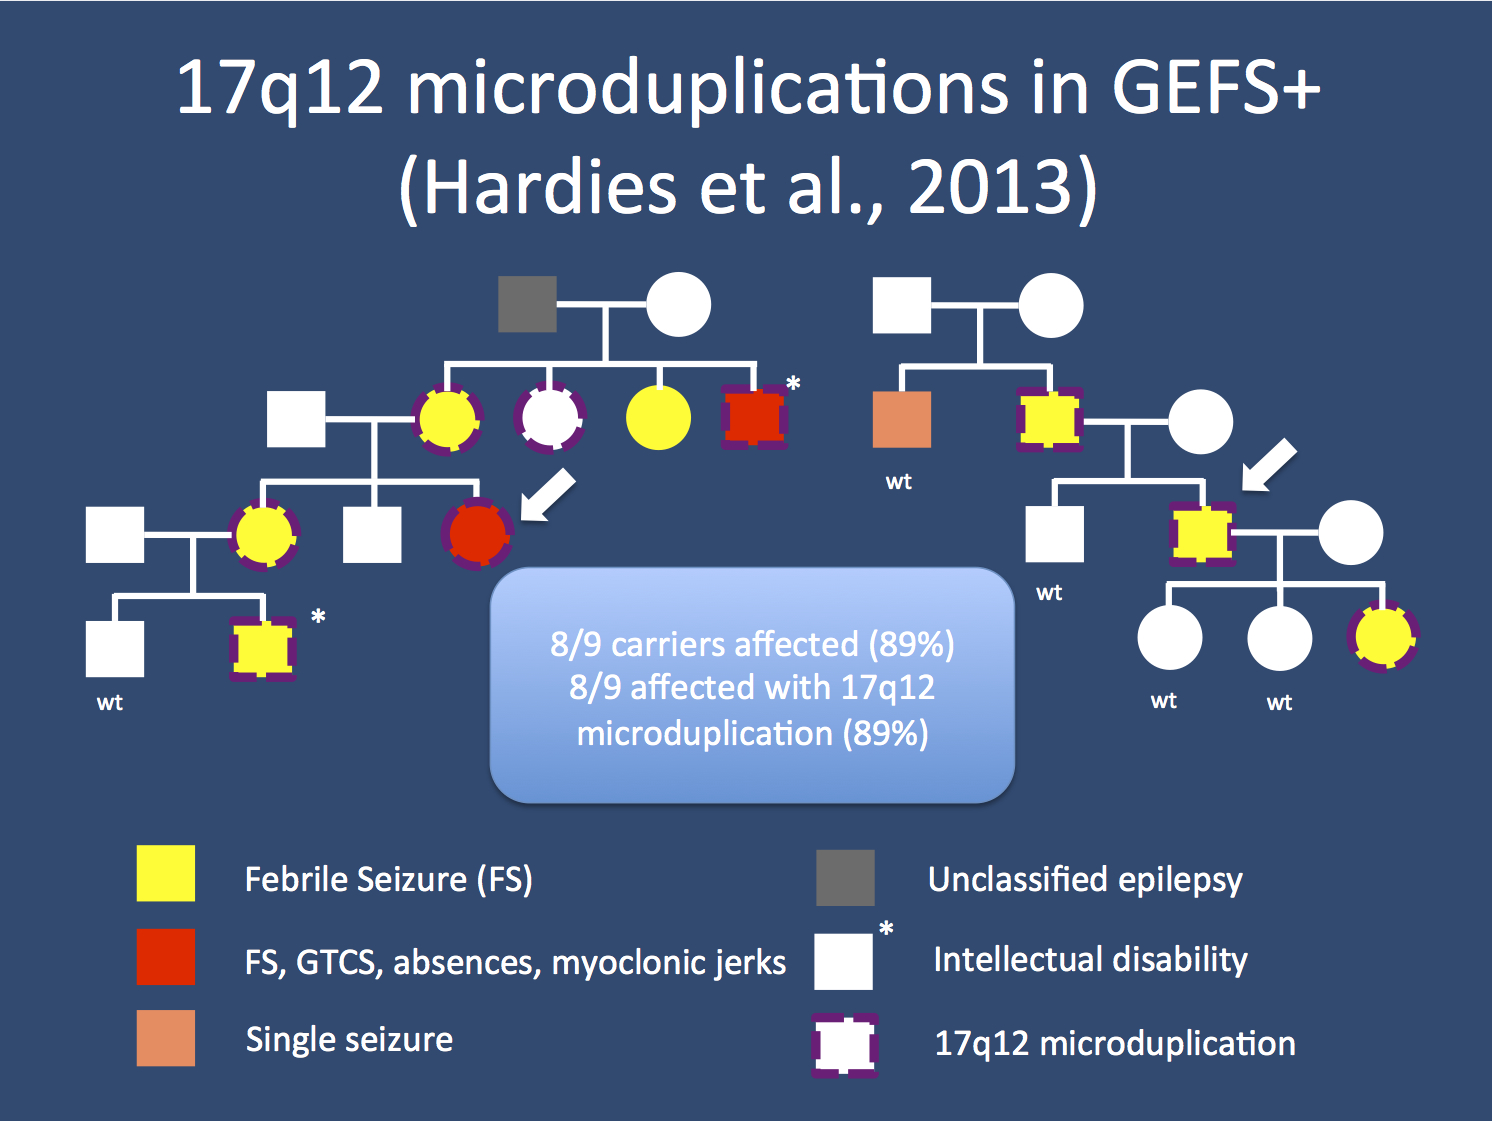 Two GEFS+ families with inherited microduplications at 17q12. The phenotypes in the families range from simple Febrile Seizures (FS) to severe epilepsy with intellectual disability. In families like this, some of the aspects of the phenotypic range may be revealed that might otherwise go unnoticed. (wt = wildtype, i.e. not microduplication, GTCS generalized tonic-clonic seizures)